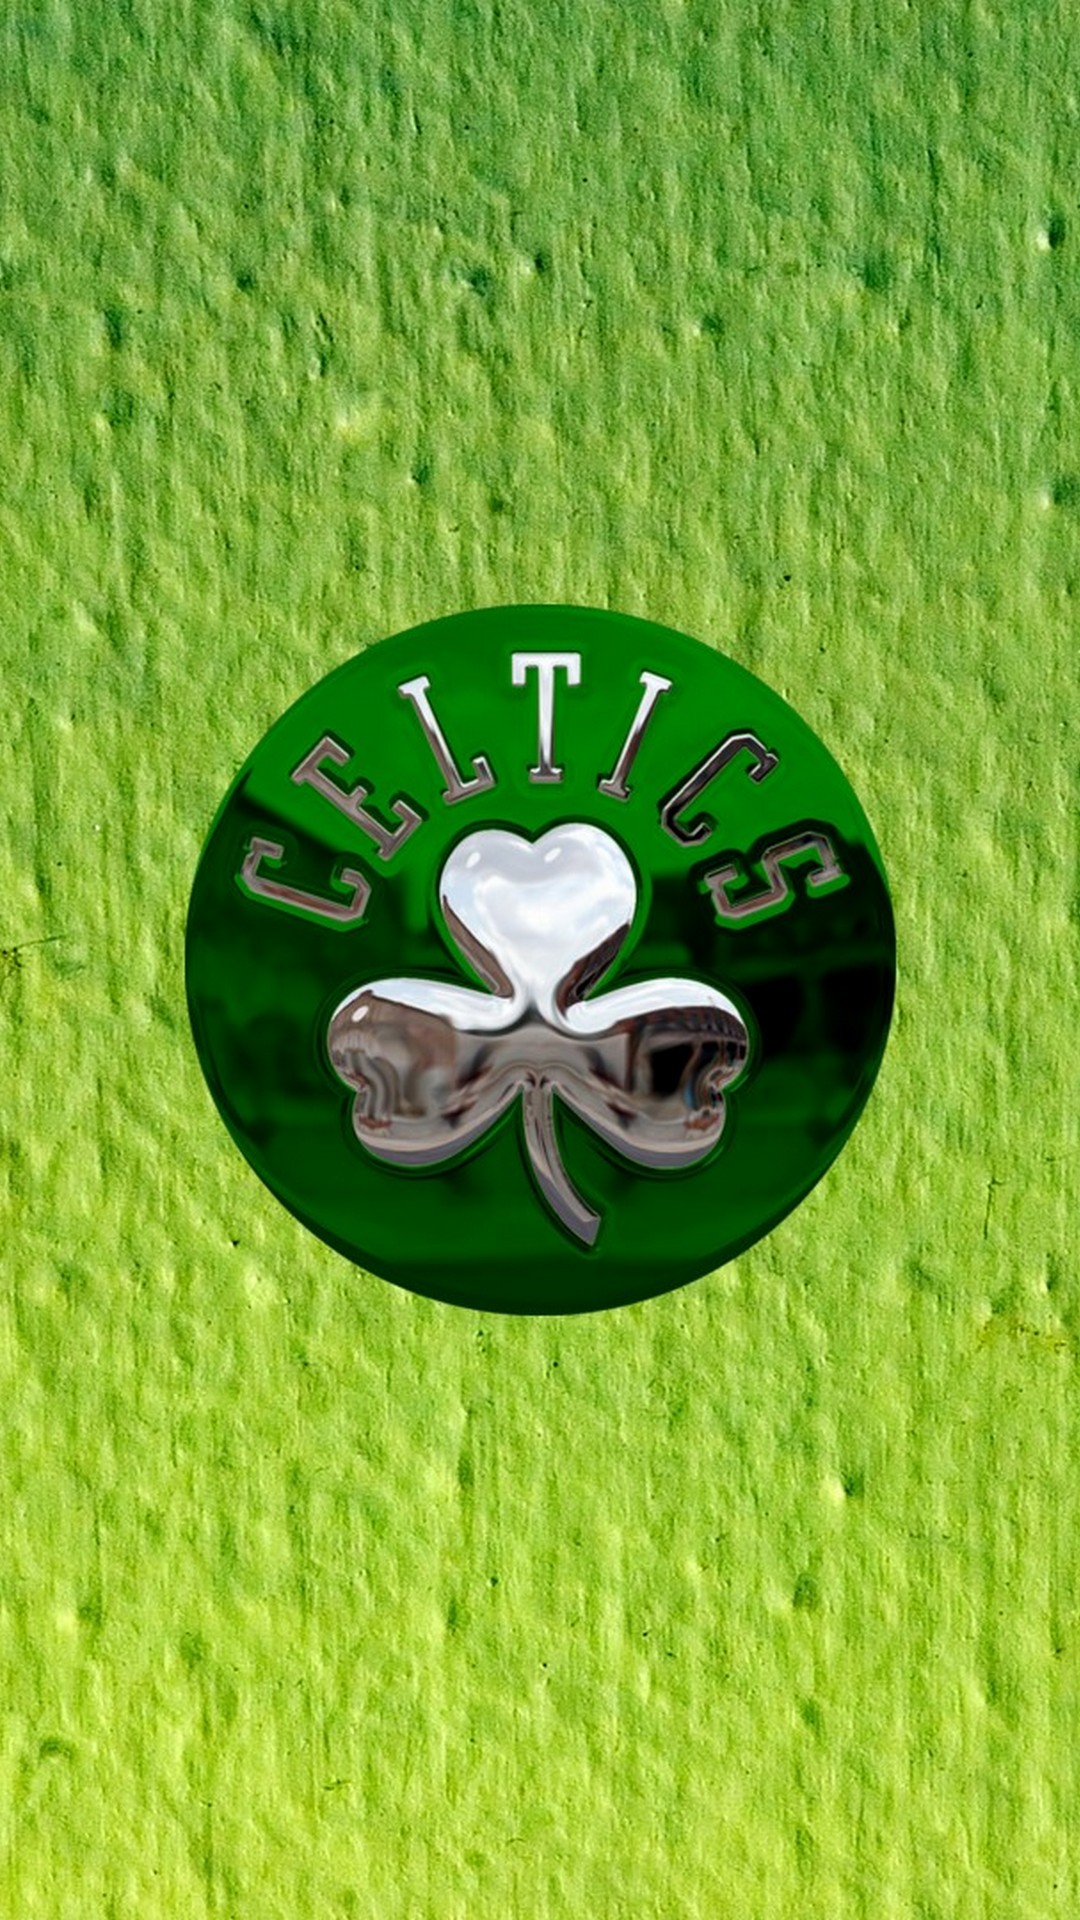 Boston Celtics Wallpaper For Mobile Android With Resolution 1080X1920 pixel. You can make this wallpaper for your Desktop Computer Backgrounds, Mac Wallpapers, Android Lock screen or iPhone Screensavers